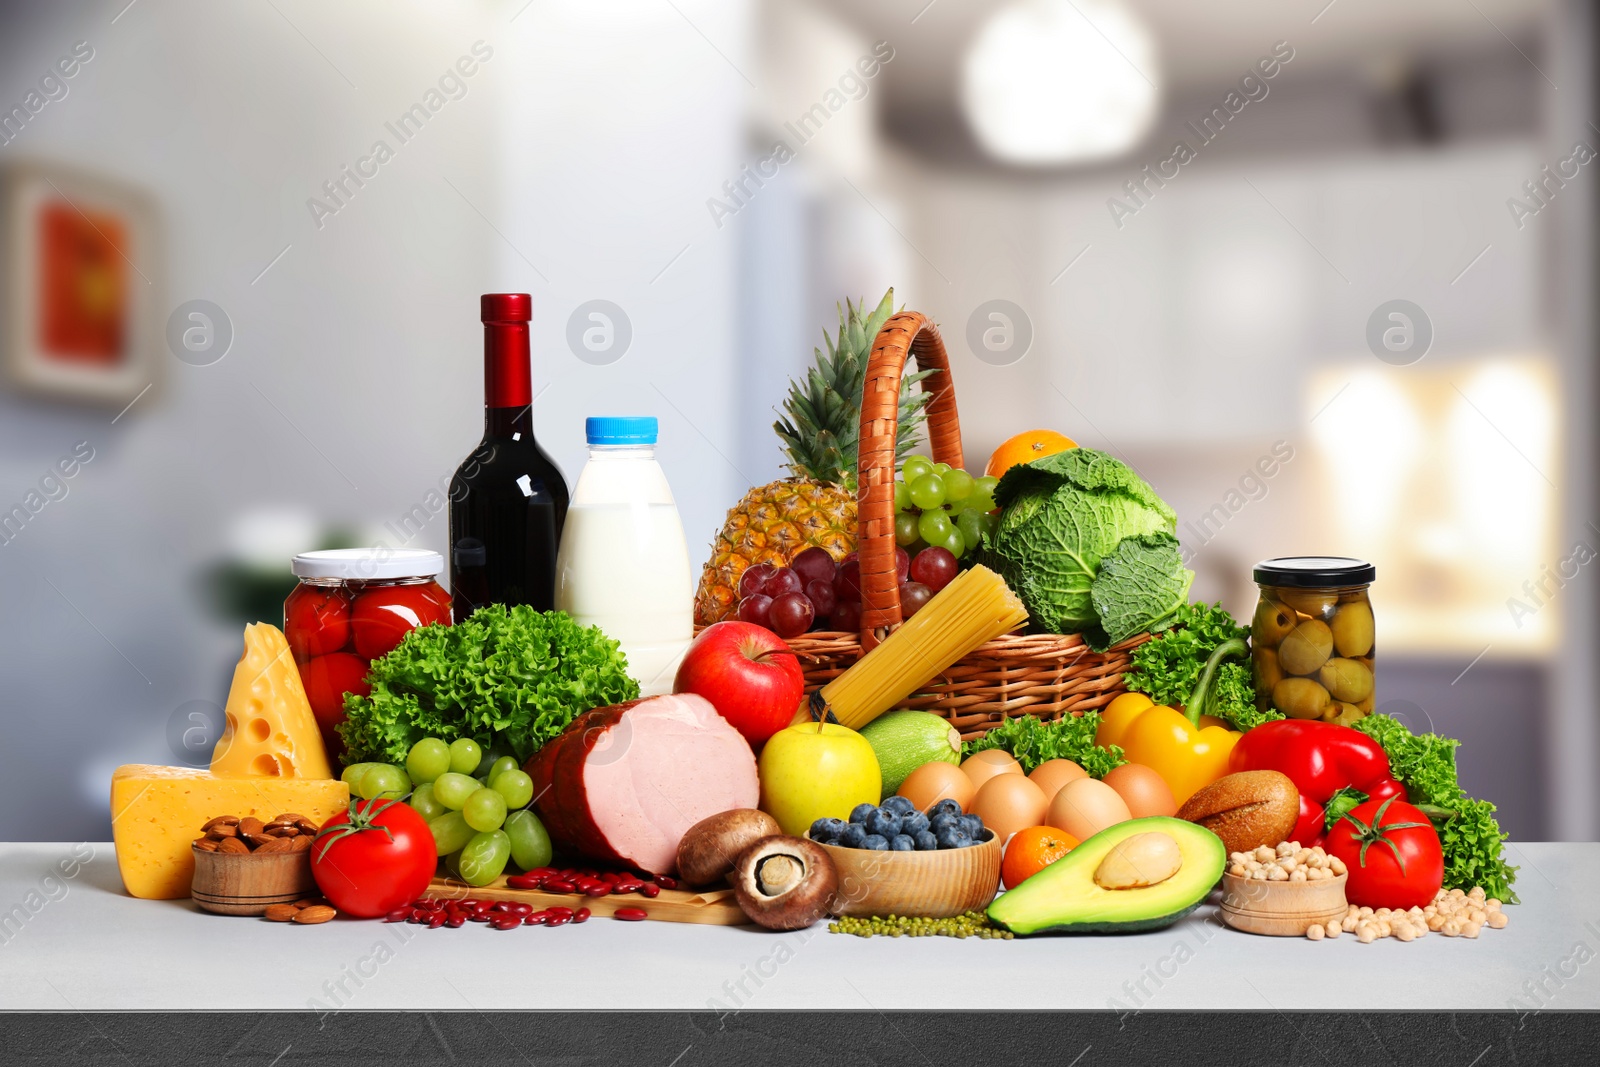 Image of Different products on wooden table in kitchen. Balanced food